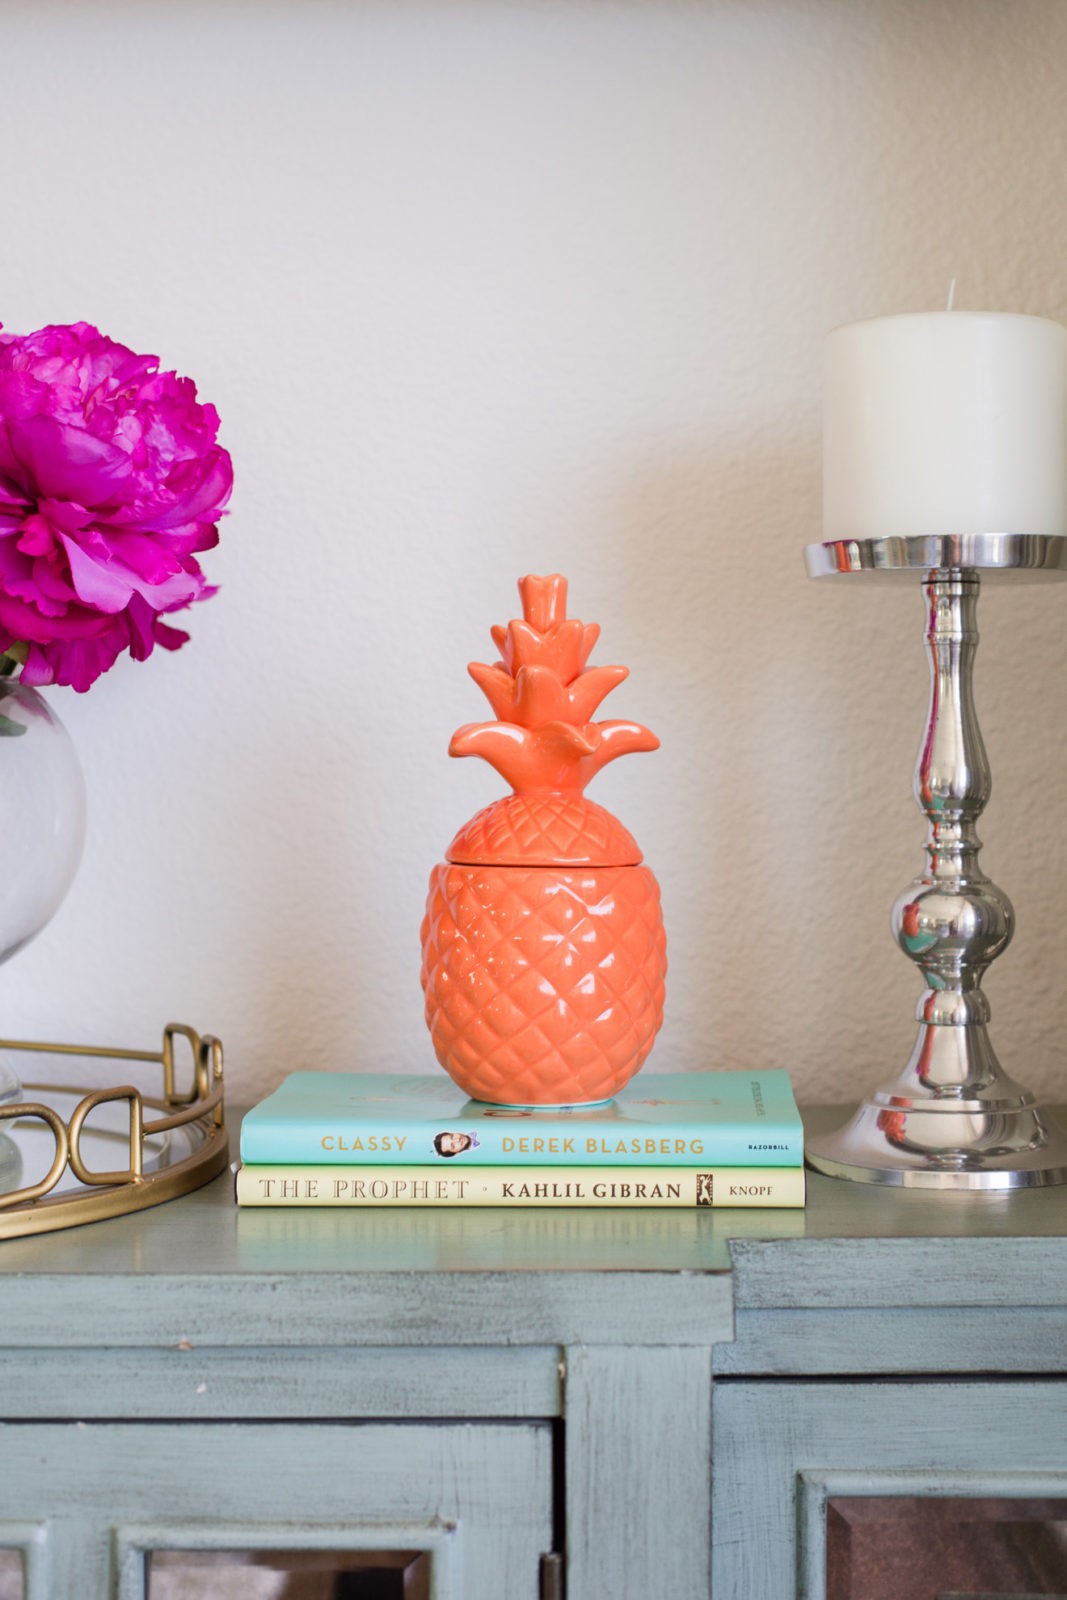 Palm Beach Style Home Decor featured by Popular Los Angeles Lifestye Blogger Laura Lily